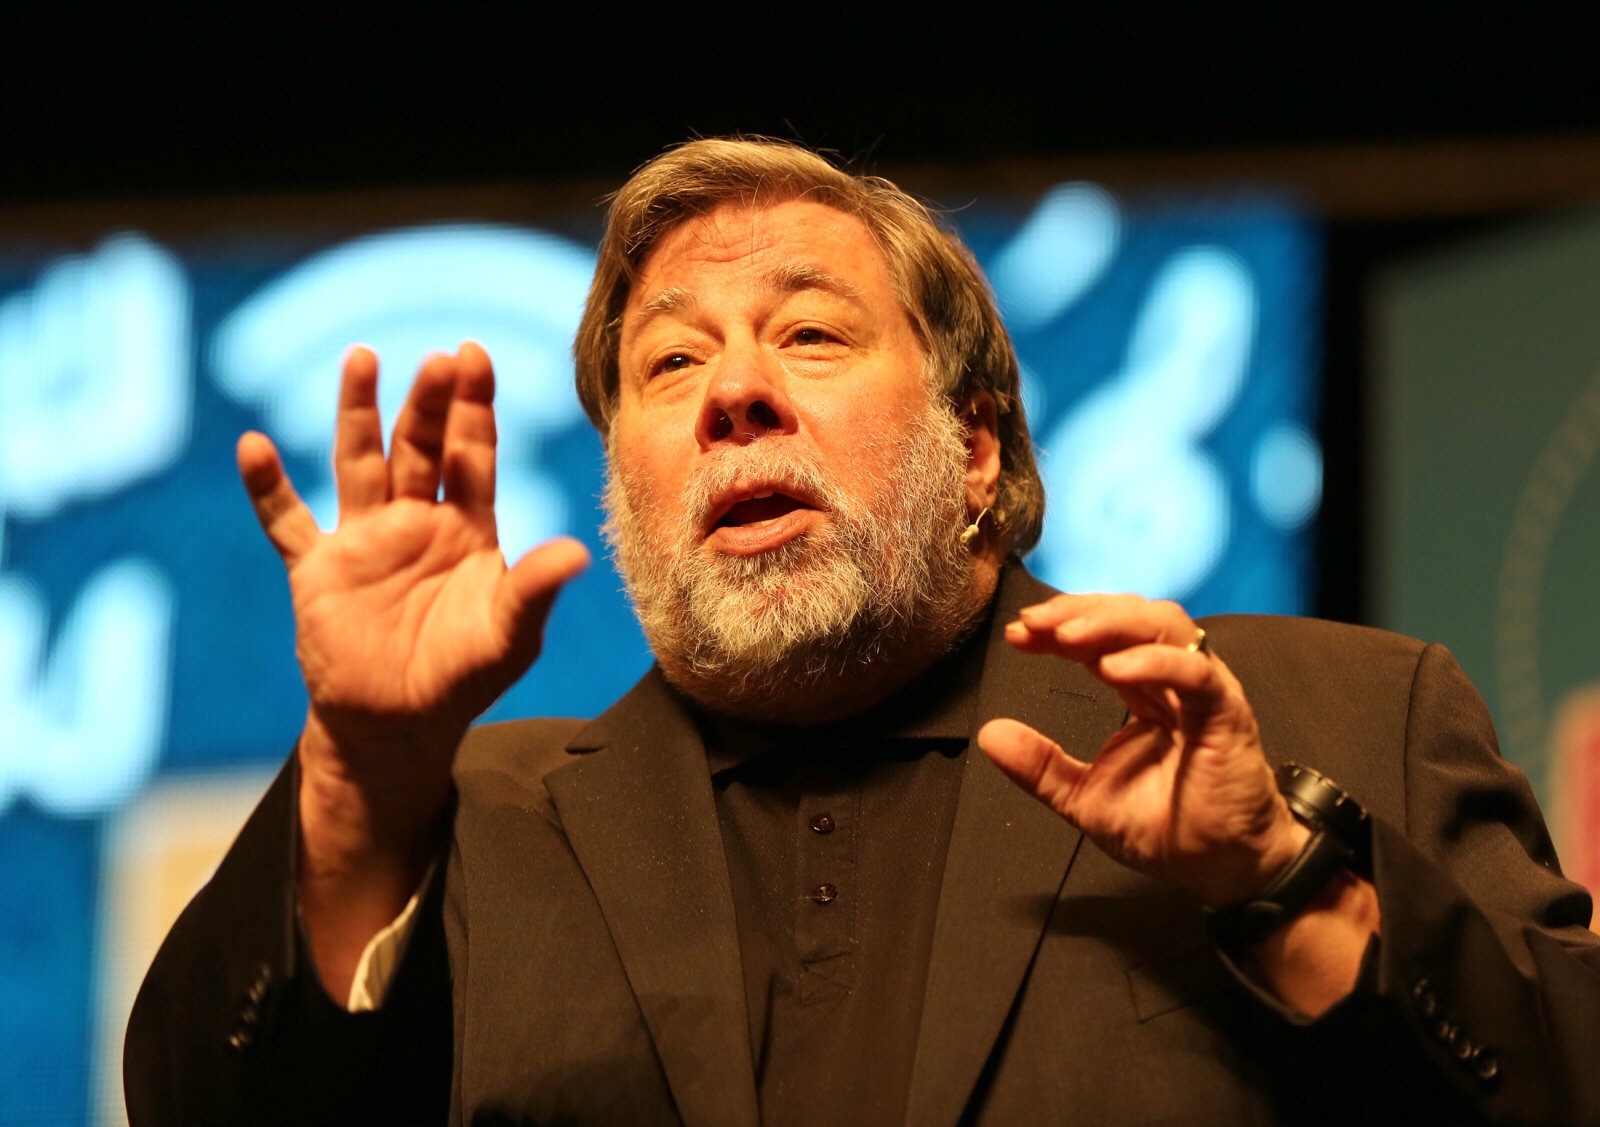 Woz was scammed out of over $70,000 worth of Bitcoins